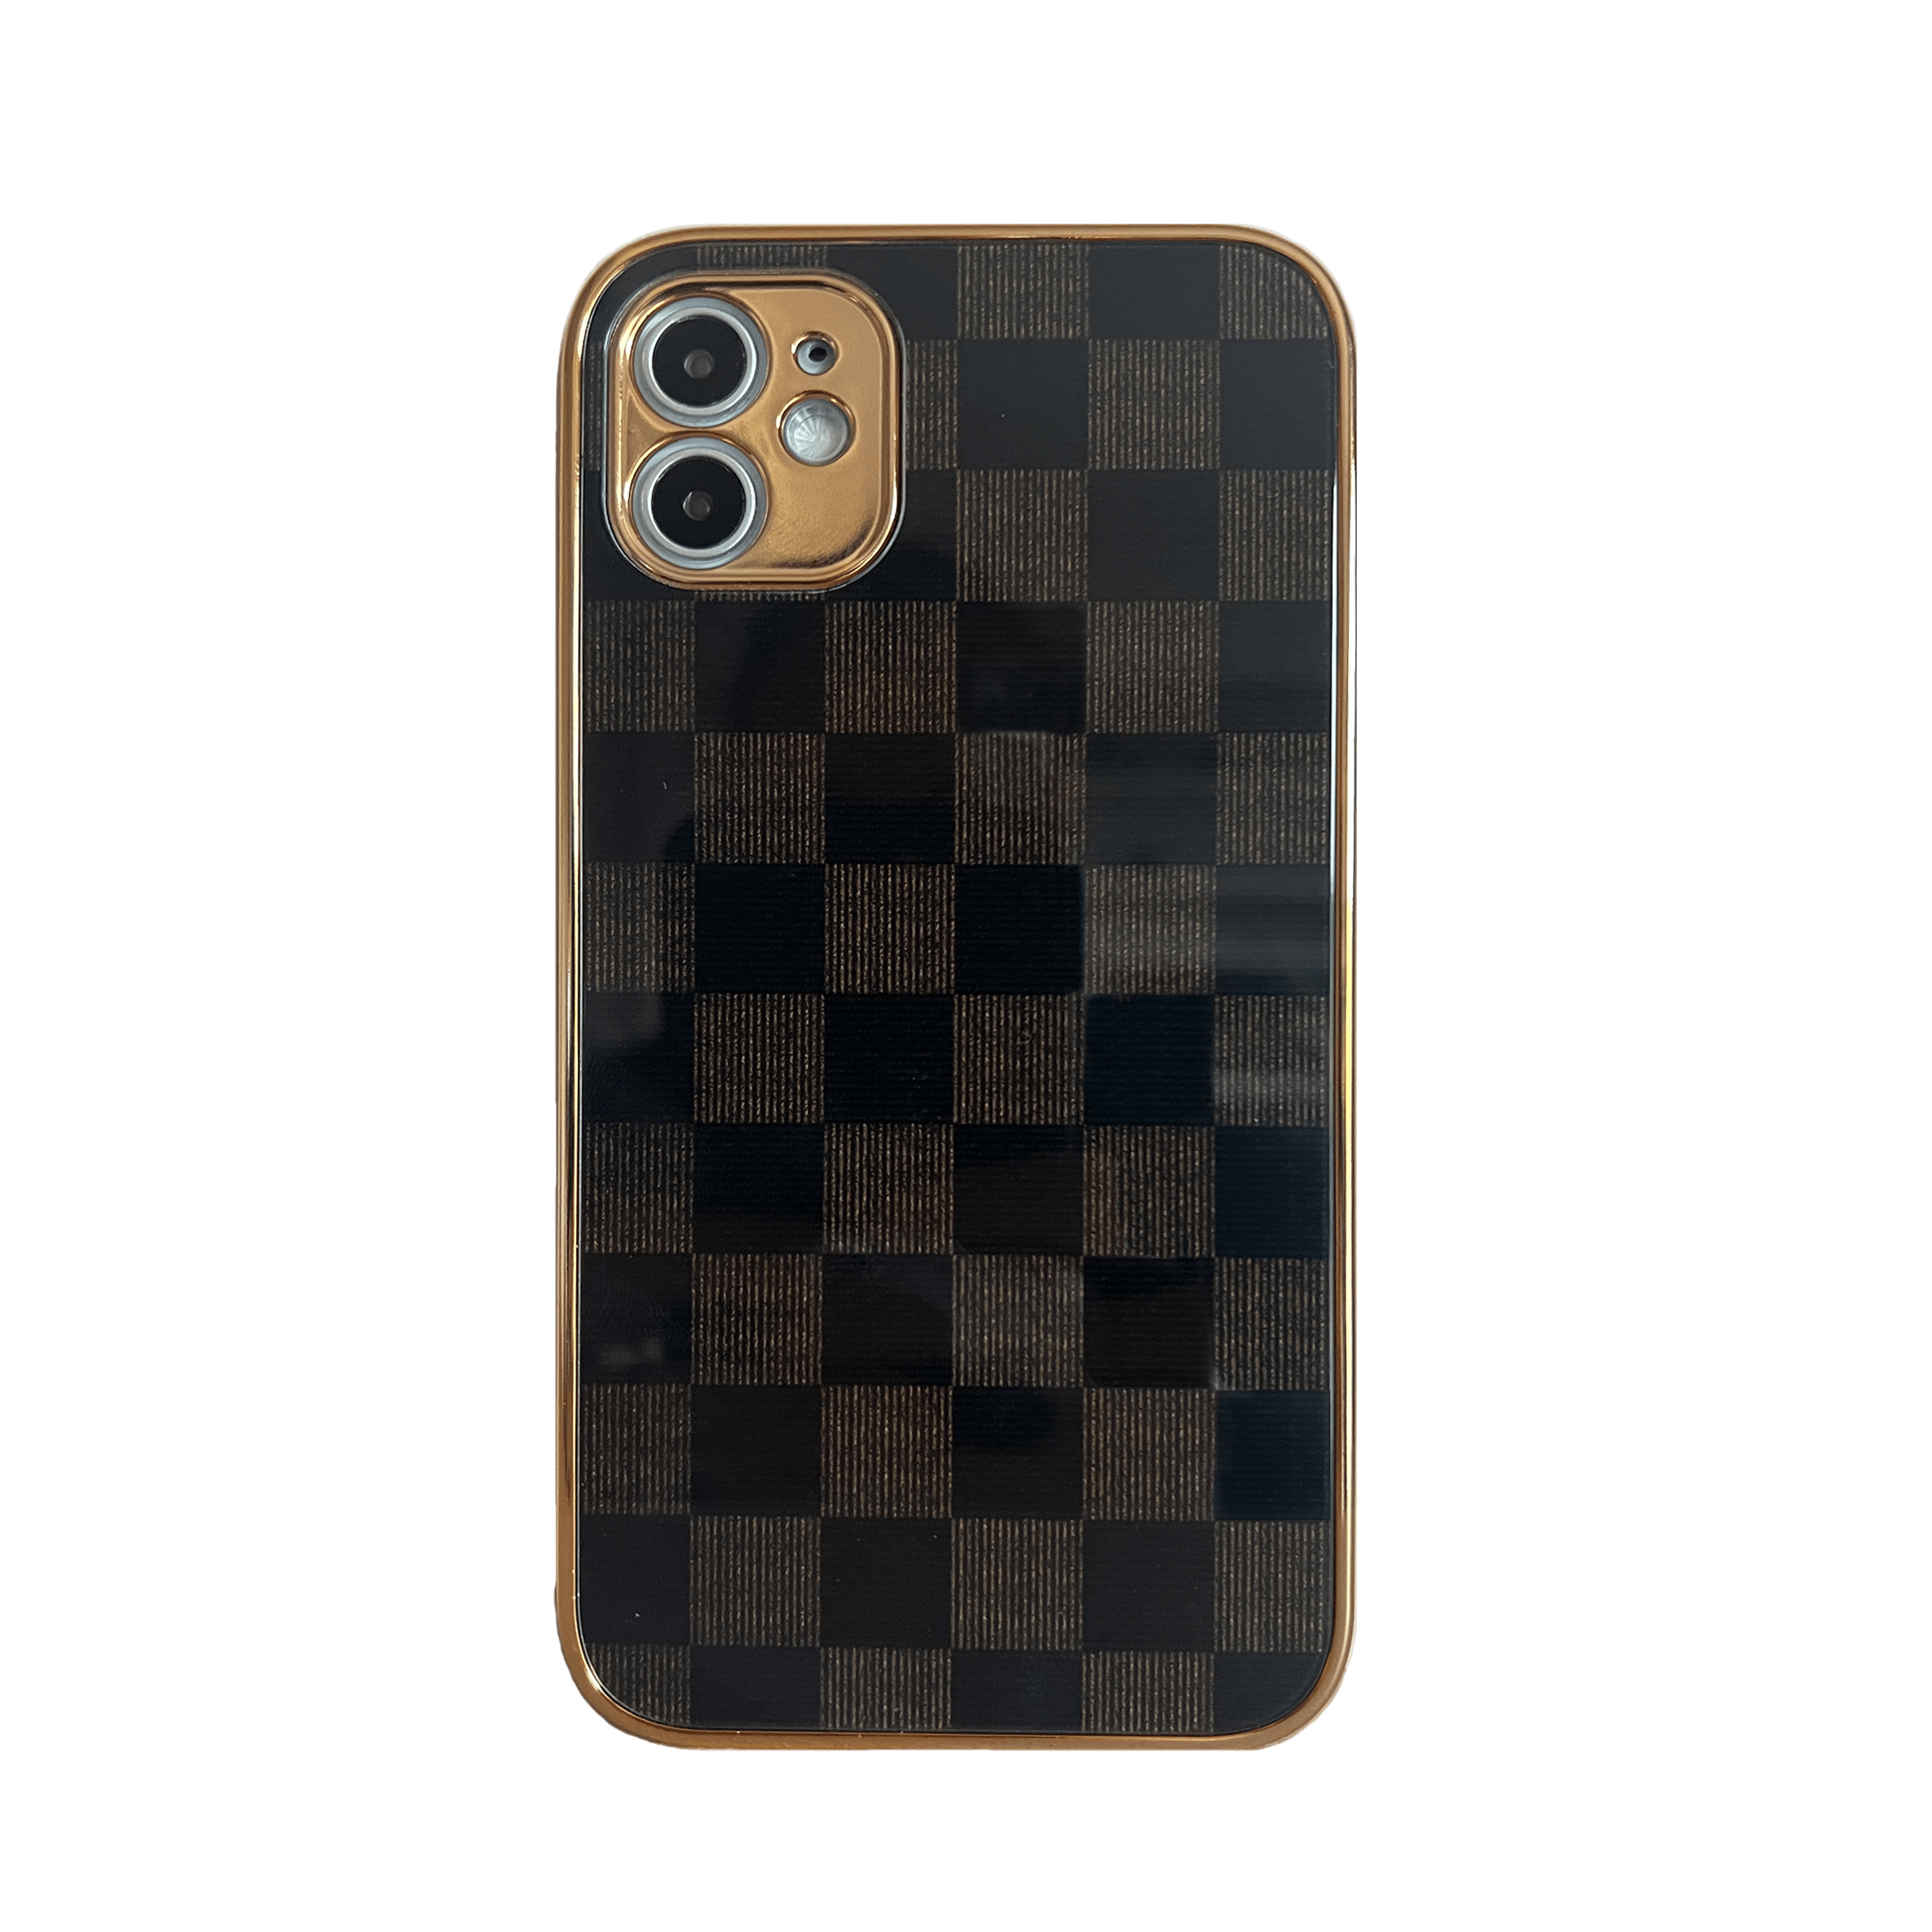 Prestige-chequered-iPhone-11-case.png